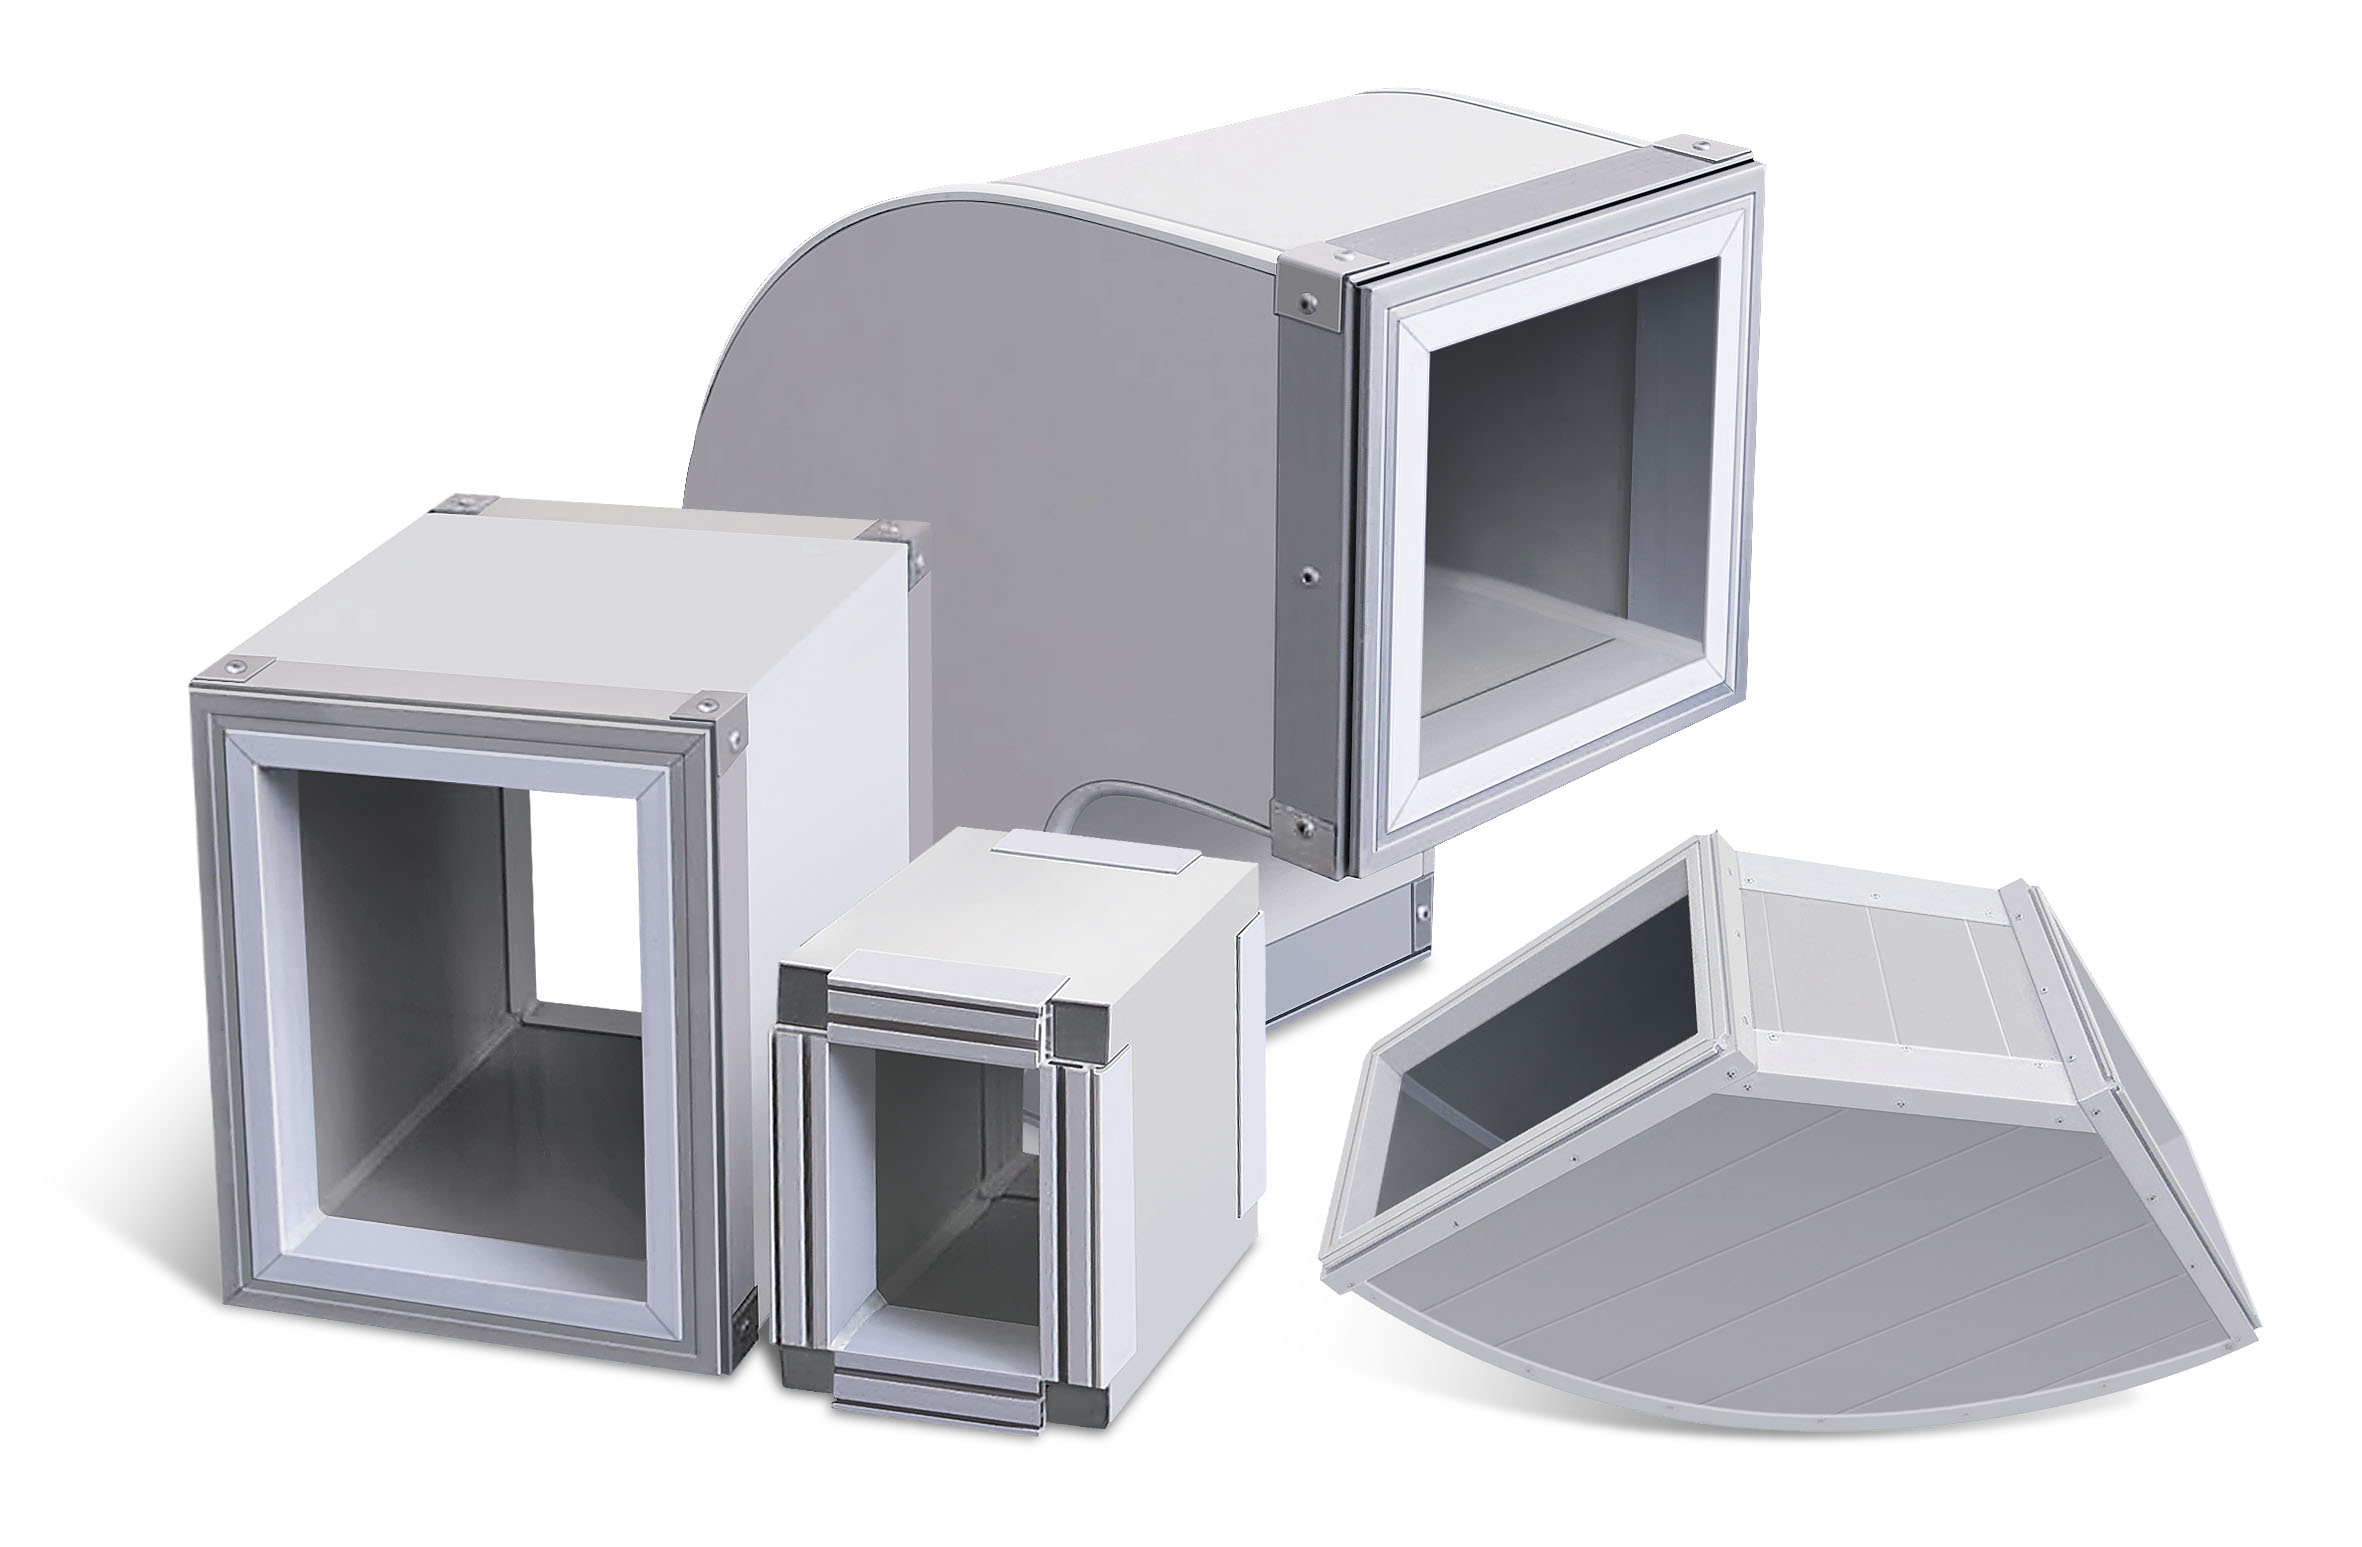 Advantages of Polyurethane(PU) Pre-insulated HVAC Ductwork